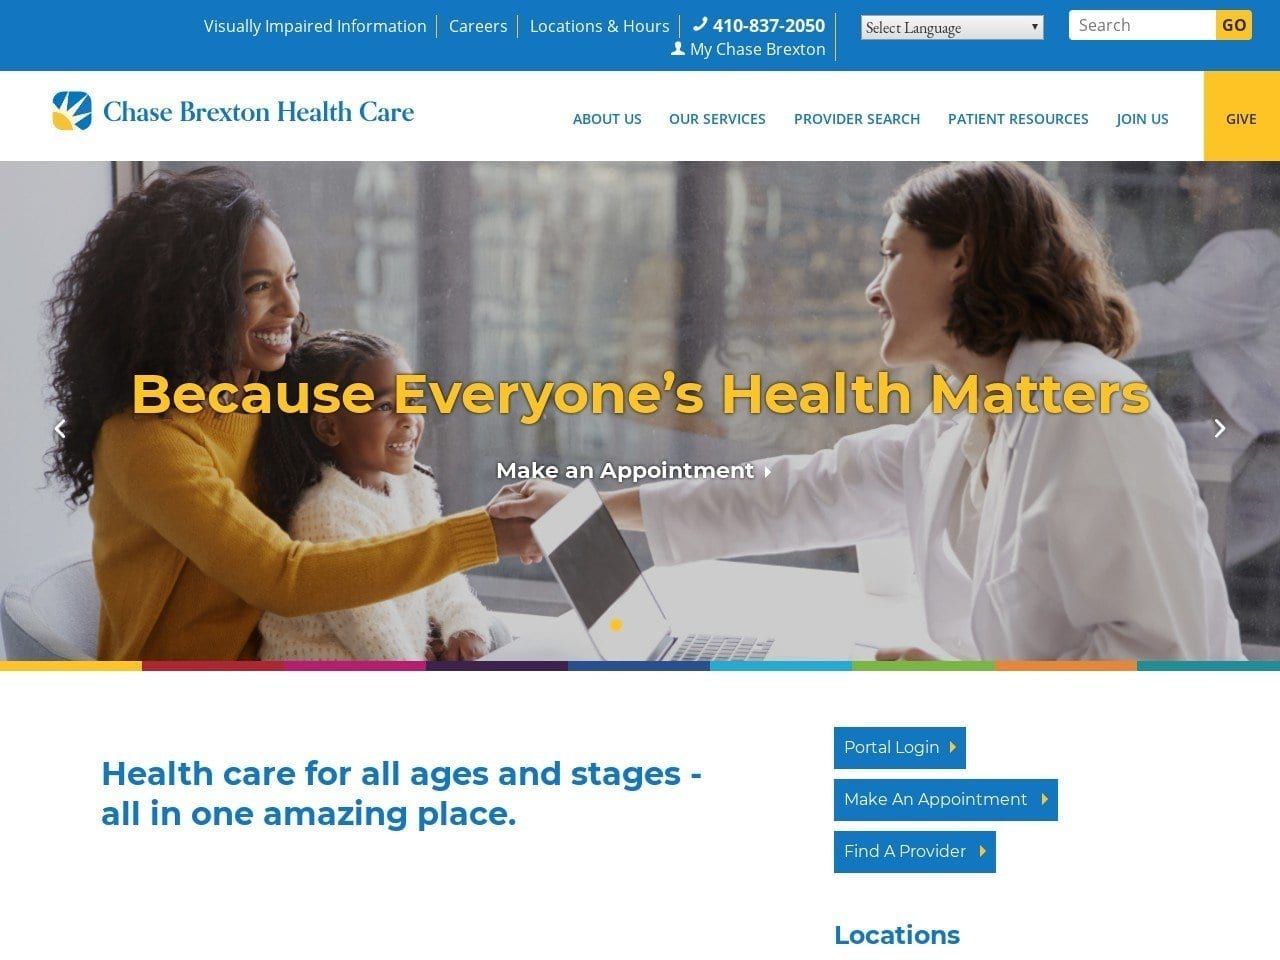 Chase Brexton Health Services Rao Neuthan MD Website Screenshot from chasebrexton.org